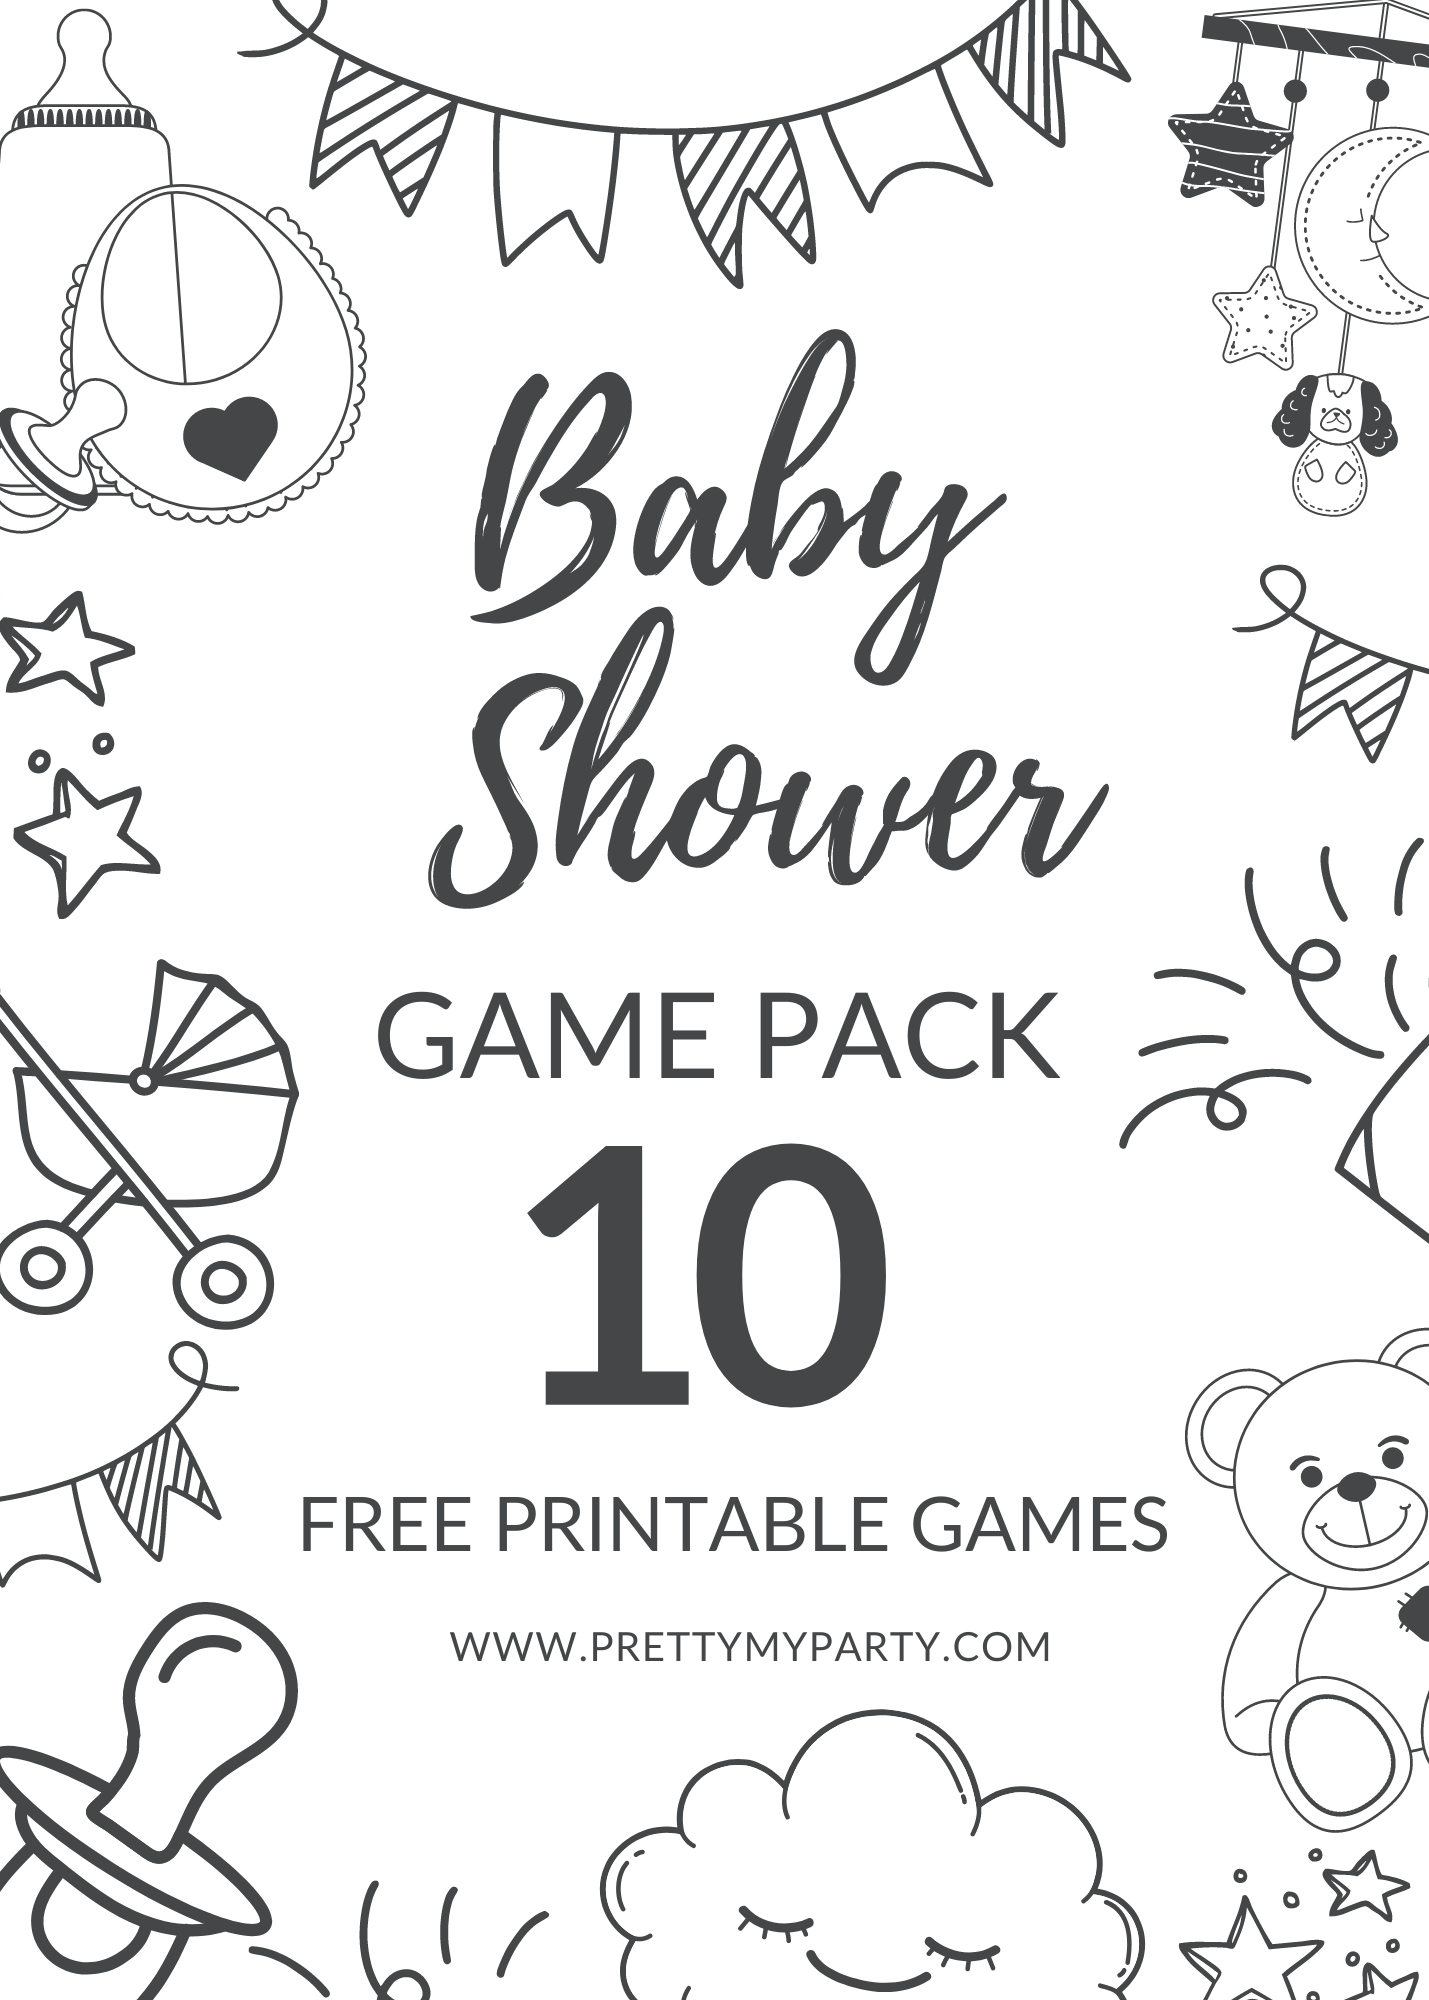 10 easy to play and free baby shower printables on www.prettymyparty.com